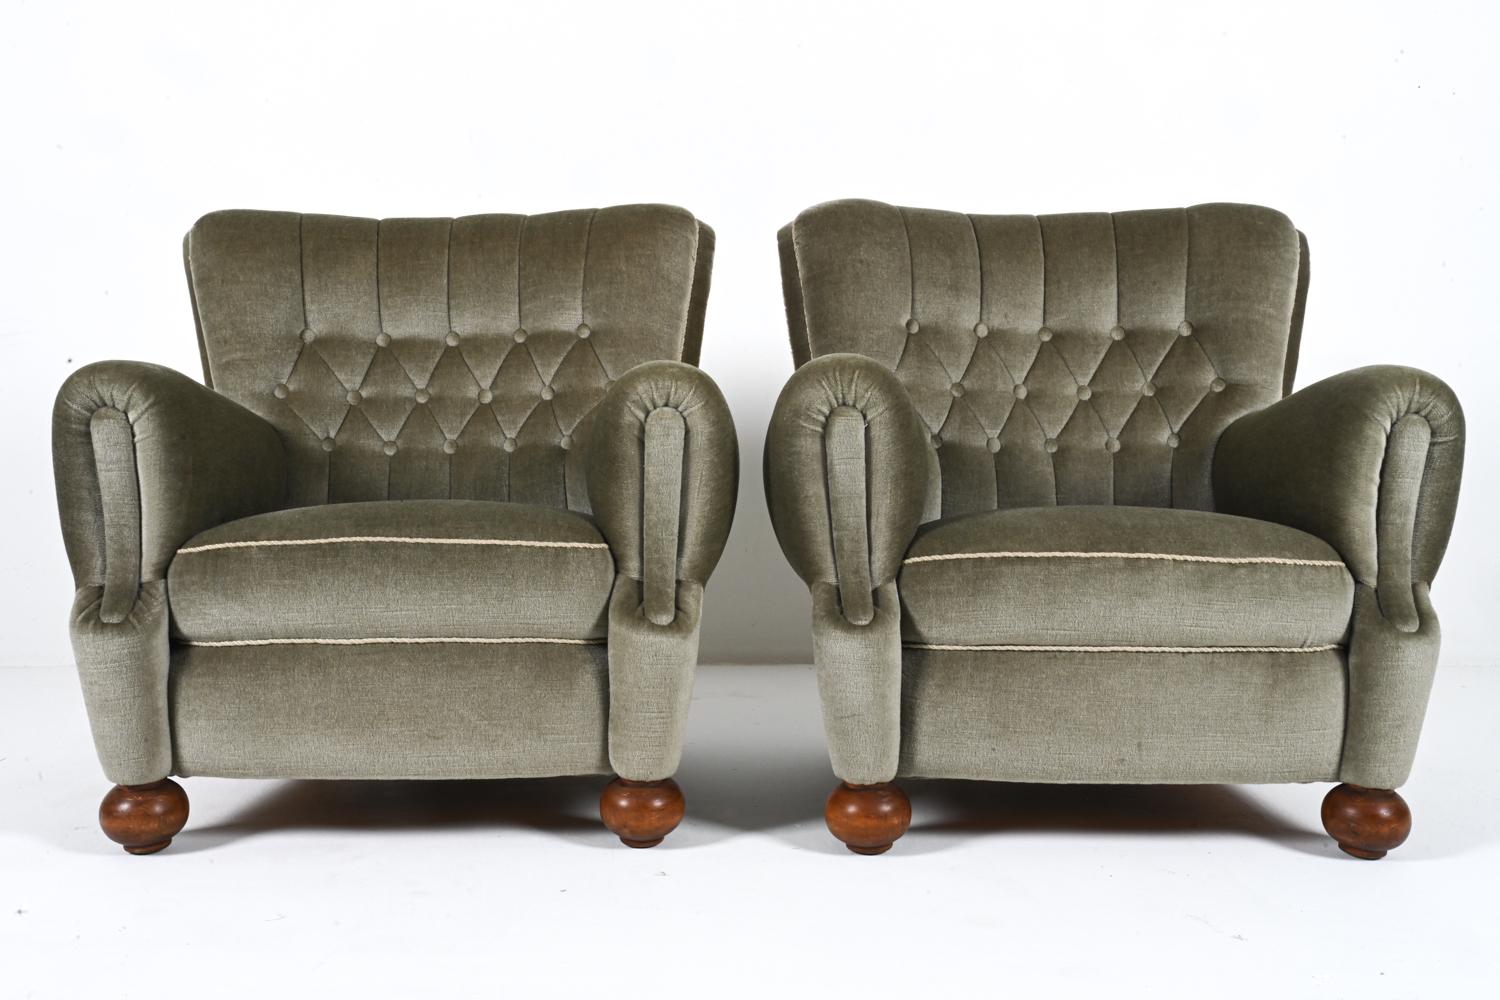 20th Century Pair of European Roll-Arm Club Chairs in Mohair and Beech, c. 1940's For Sale